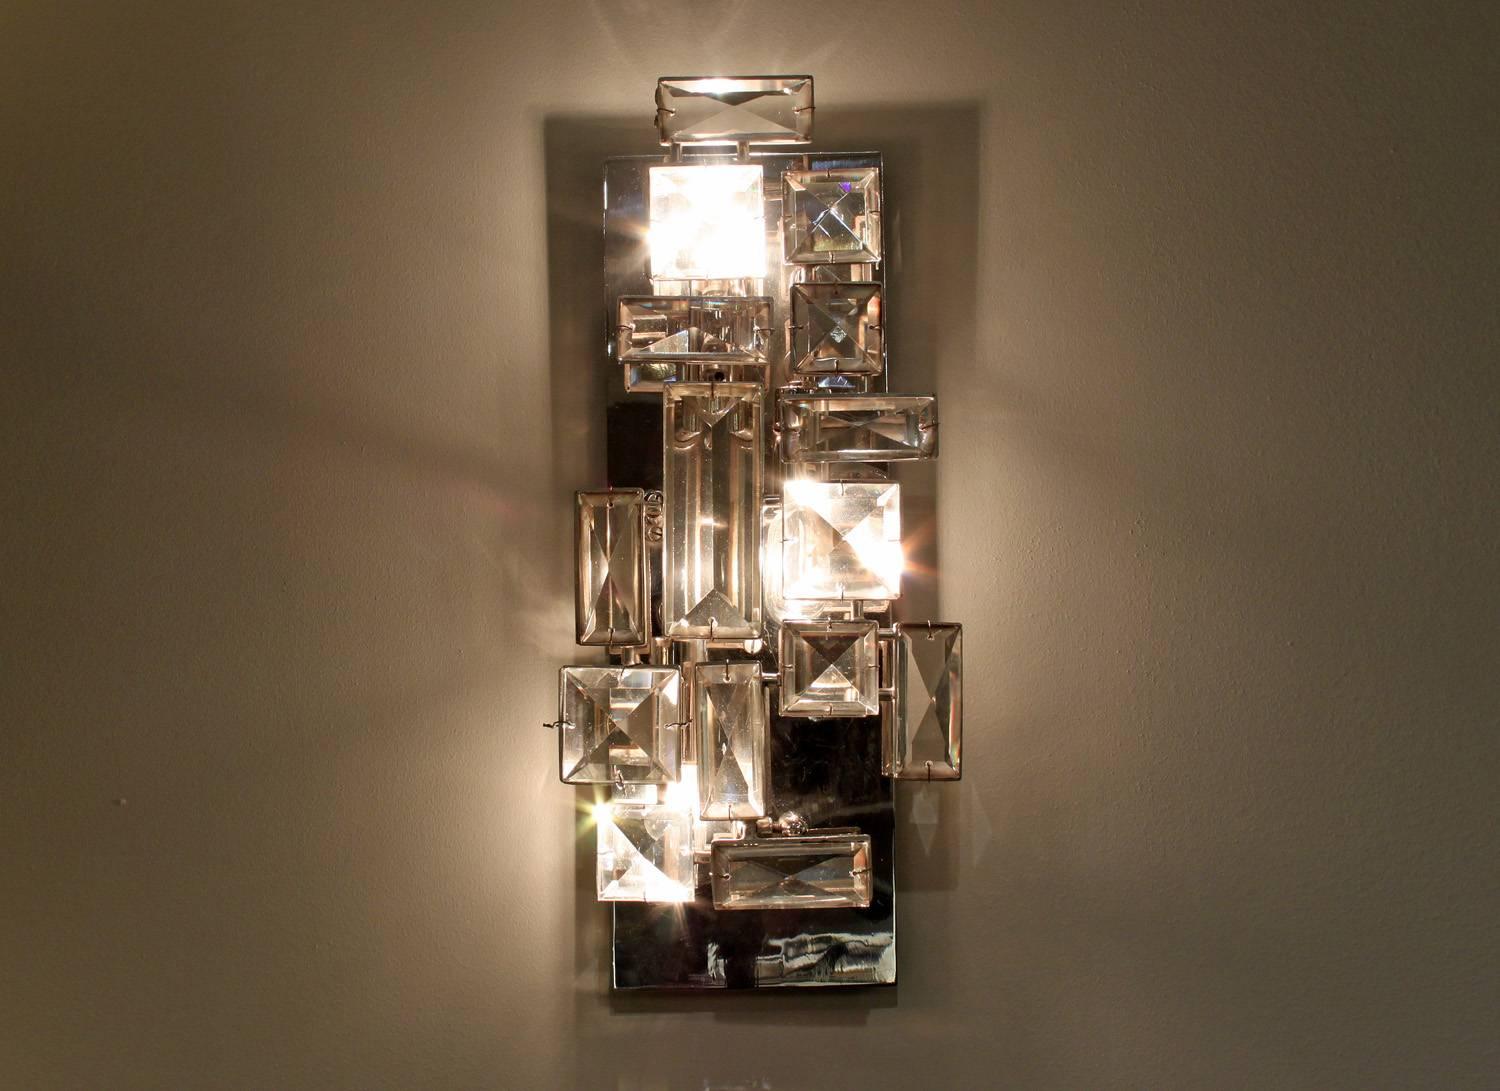 Exceptional sconce in chrome-plated steel with faceted crystals designed by Hans Harald Rath for J. & L. Lobmeyr, Vienna, Austria, circa 1966 (signed in metal 